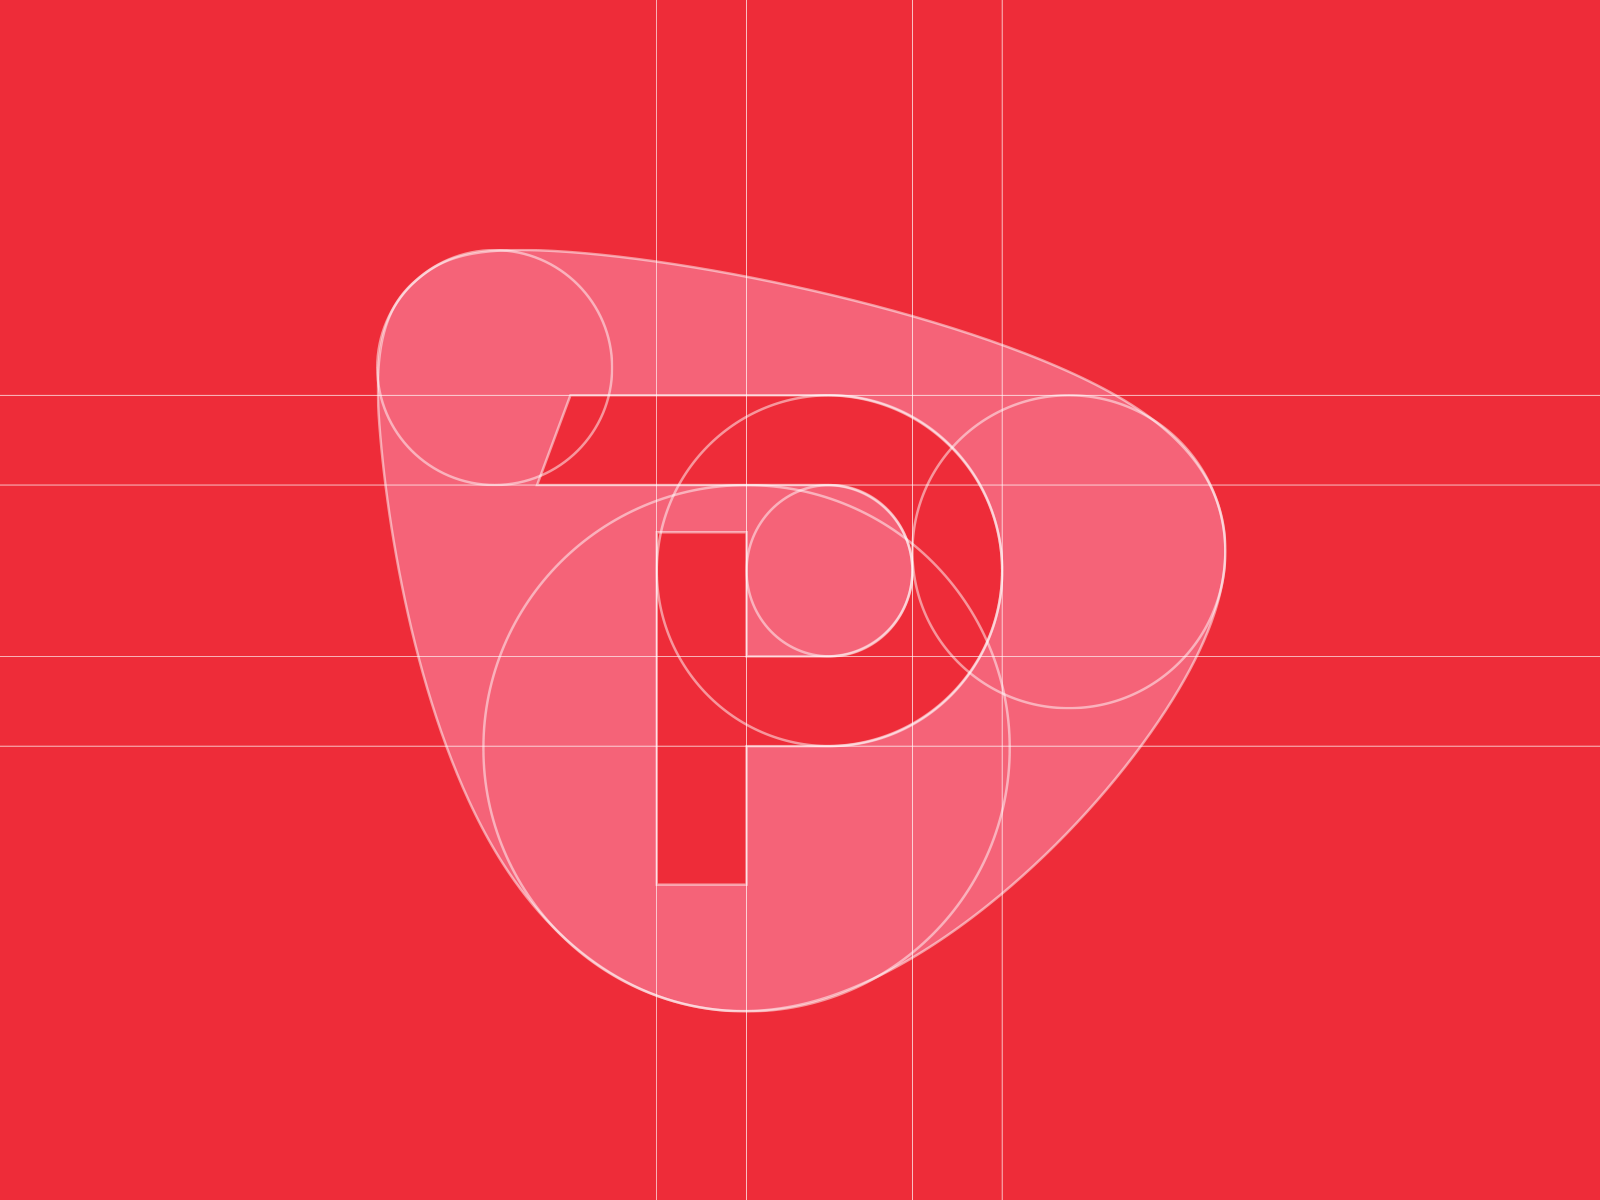 Pepperstone logo [grid] by Aiste for smart by design on ...